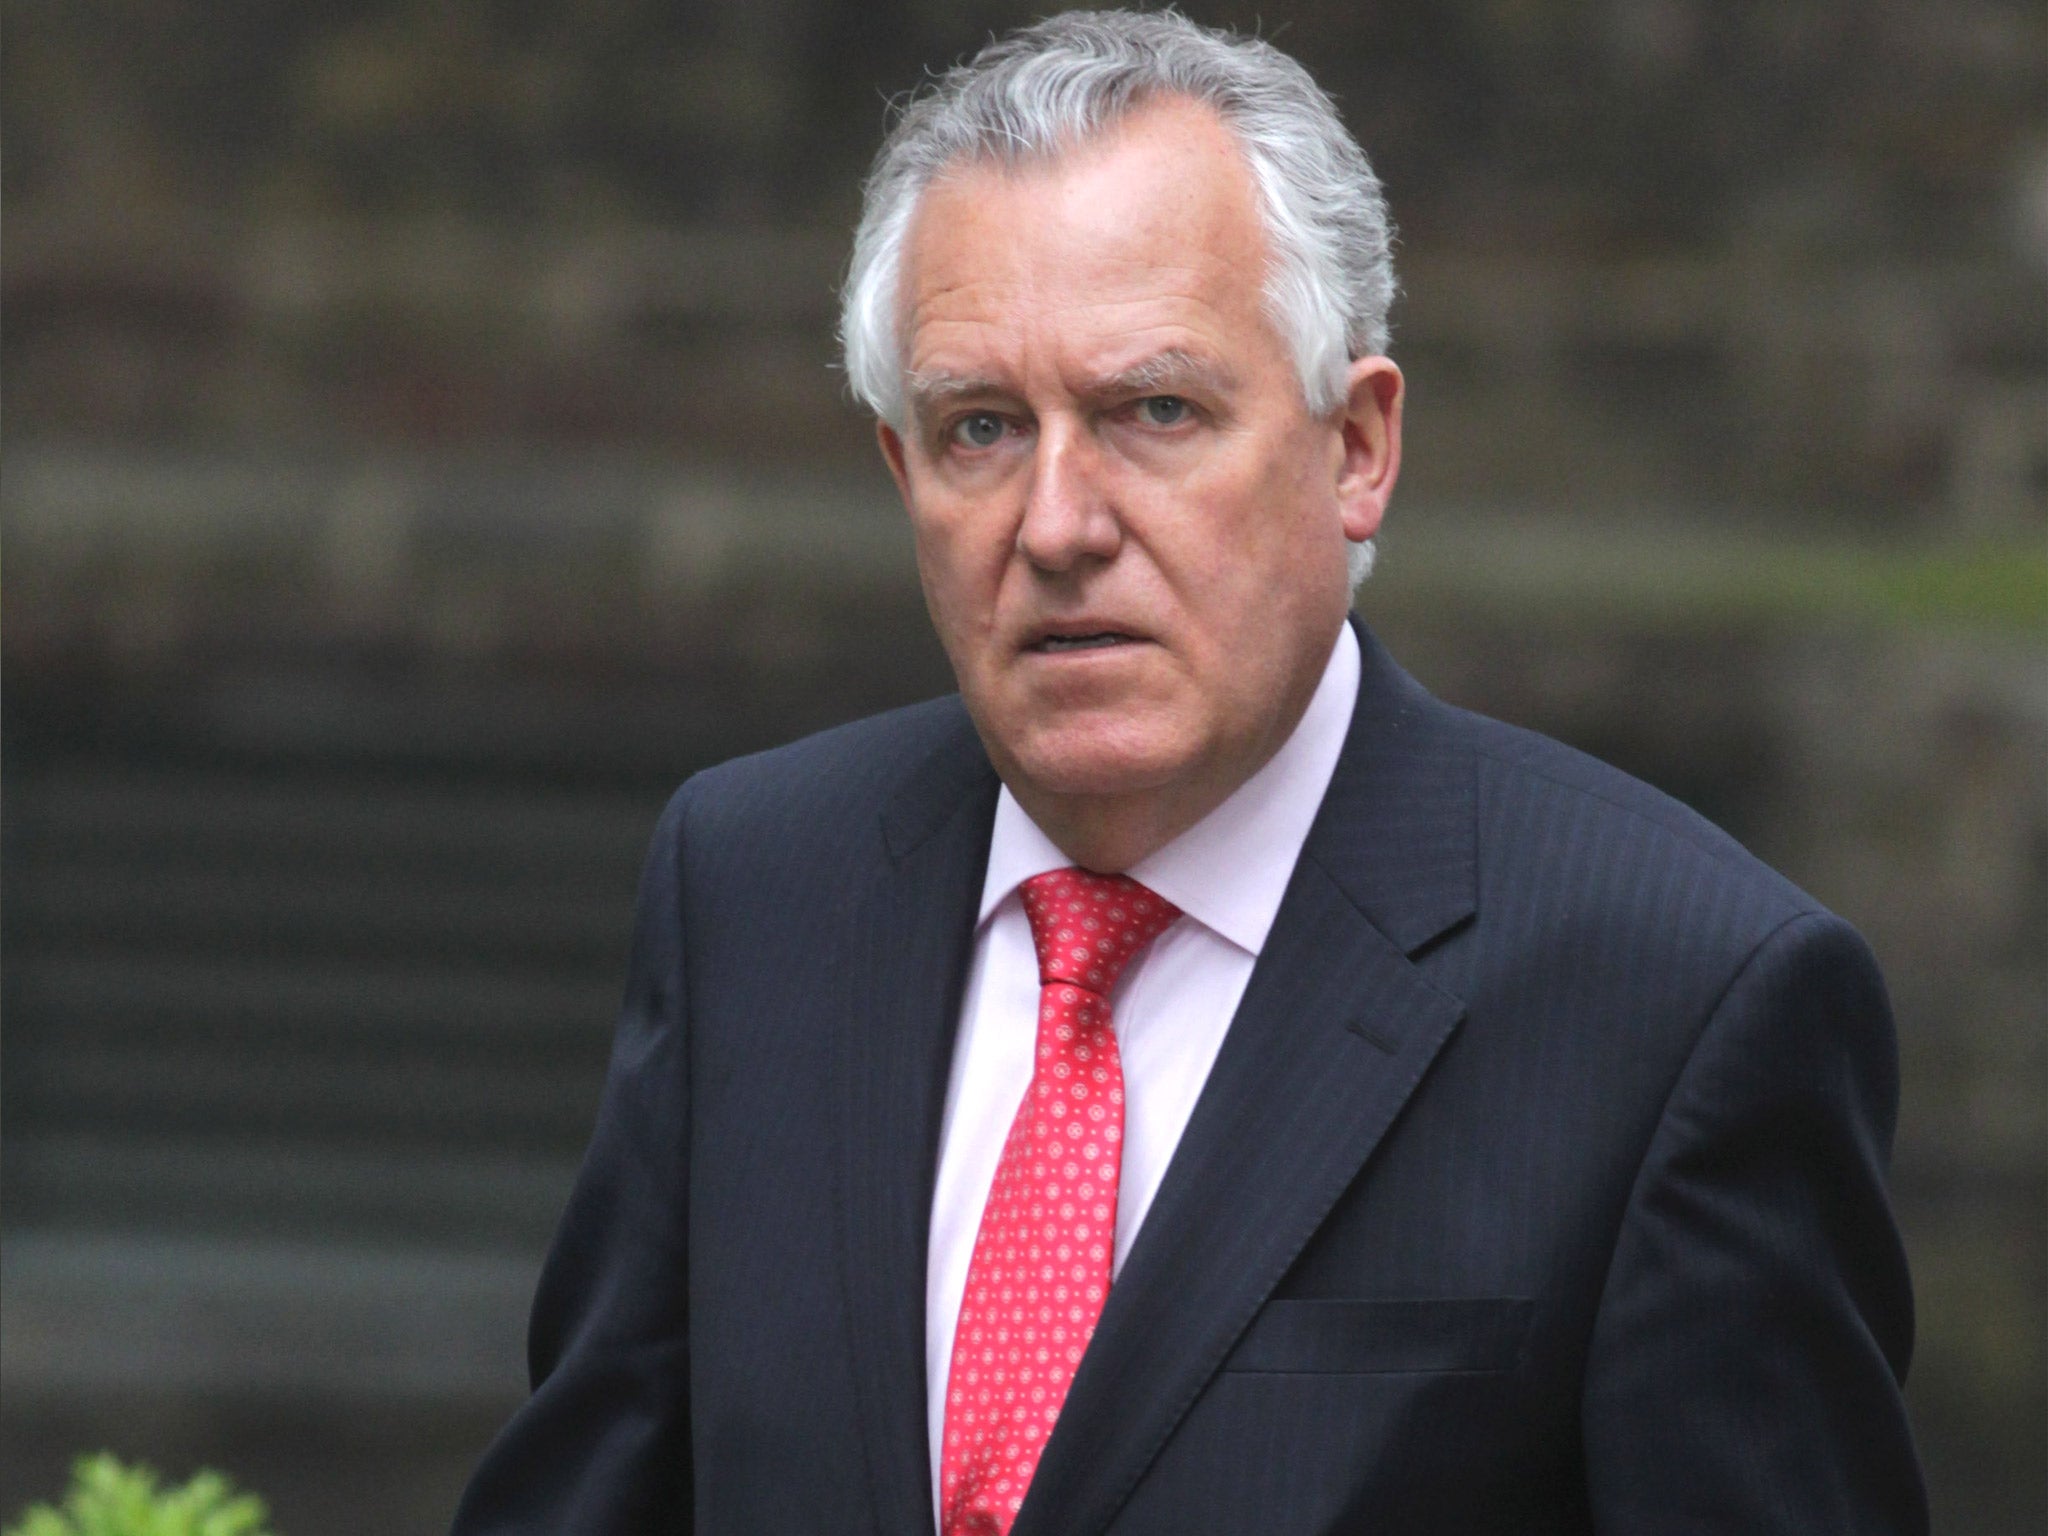 The Labour MP Peter Hain has dismissed as “plain nonsense” the extraordinary claim made by Fifa President Sepp Blatter that “no boycott of a sporting event has ever achieved anything.”